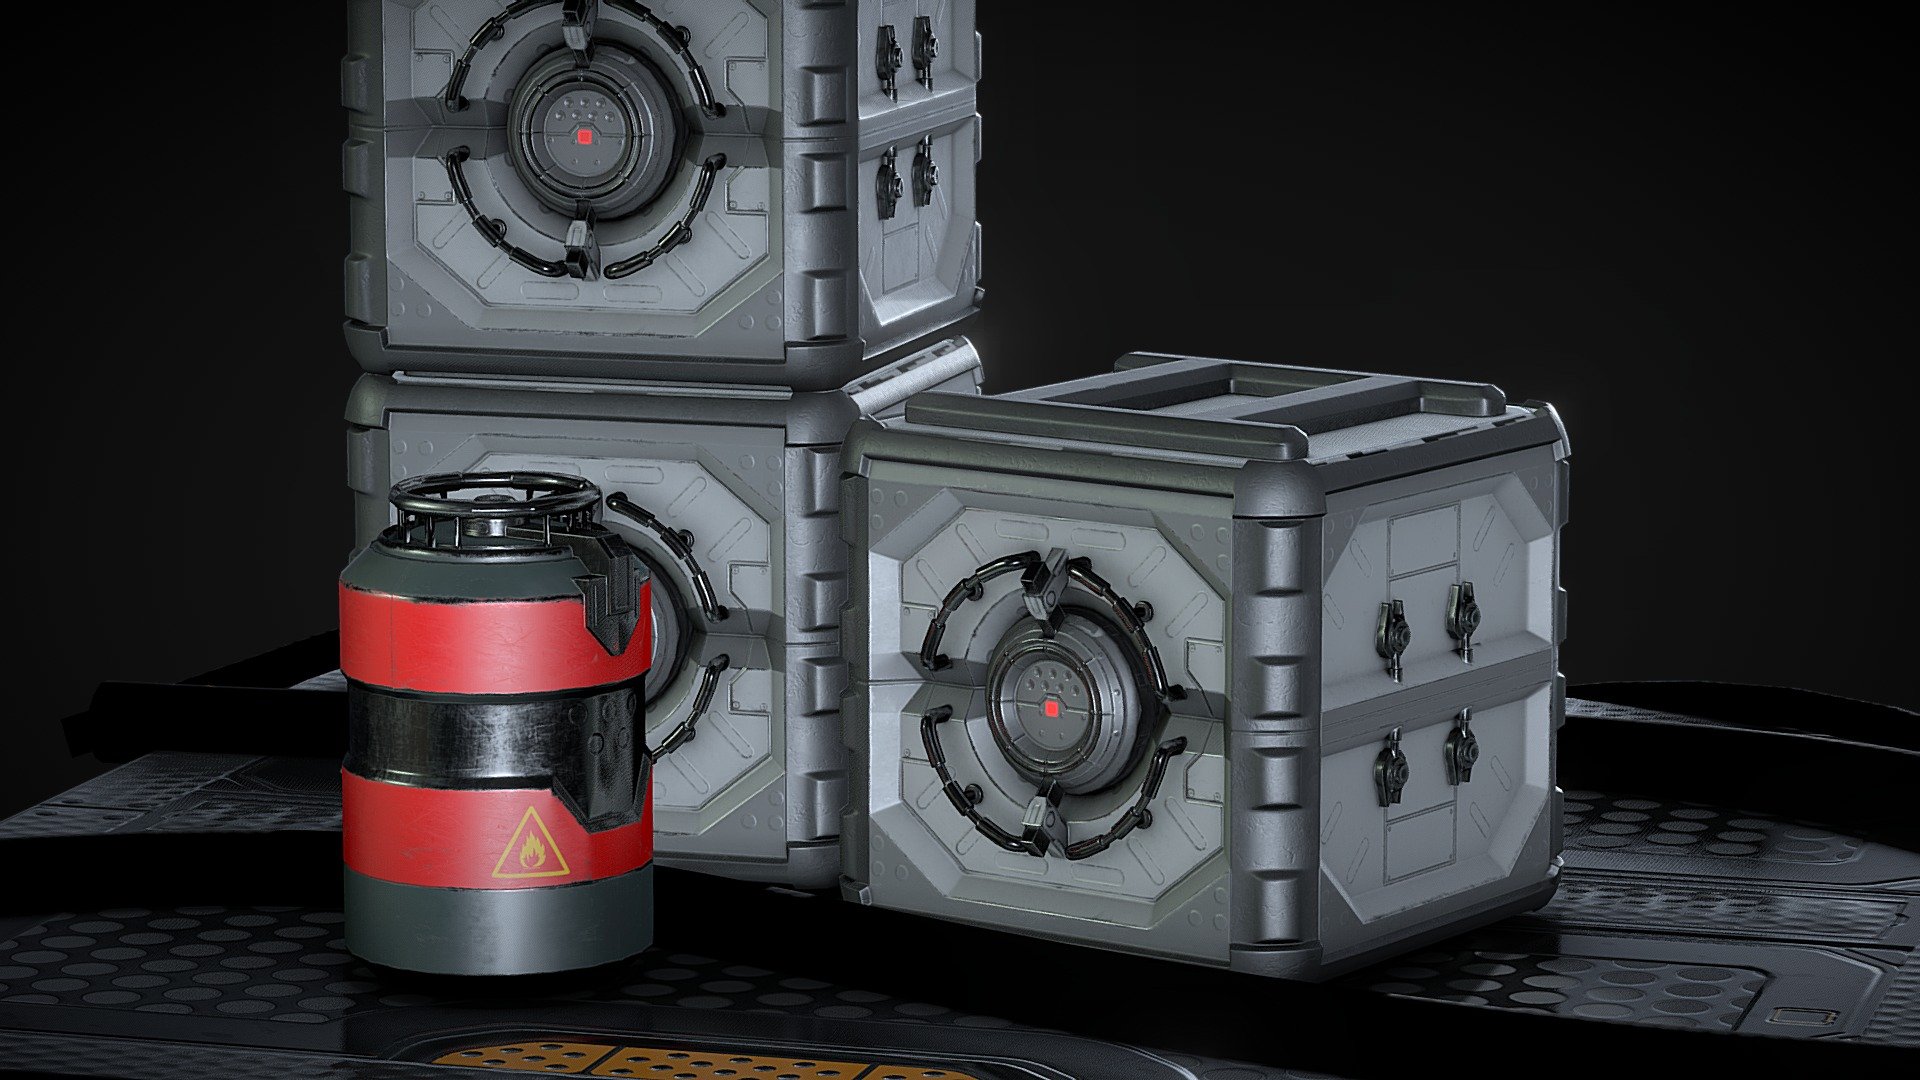 Sci-fi crate assets I created a few years ago, long been needing a retexture. Will likely upload two other models to make a miniature sci-fi asset scene. The floor texture is the only one that isn't mine&ndash;courtesy of gametextures.com 3d model